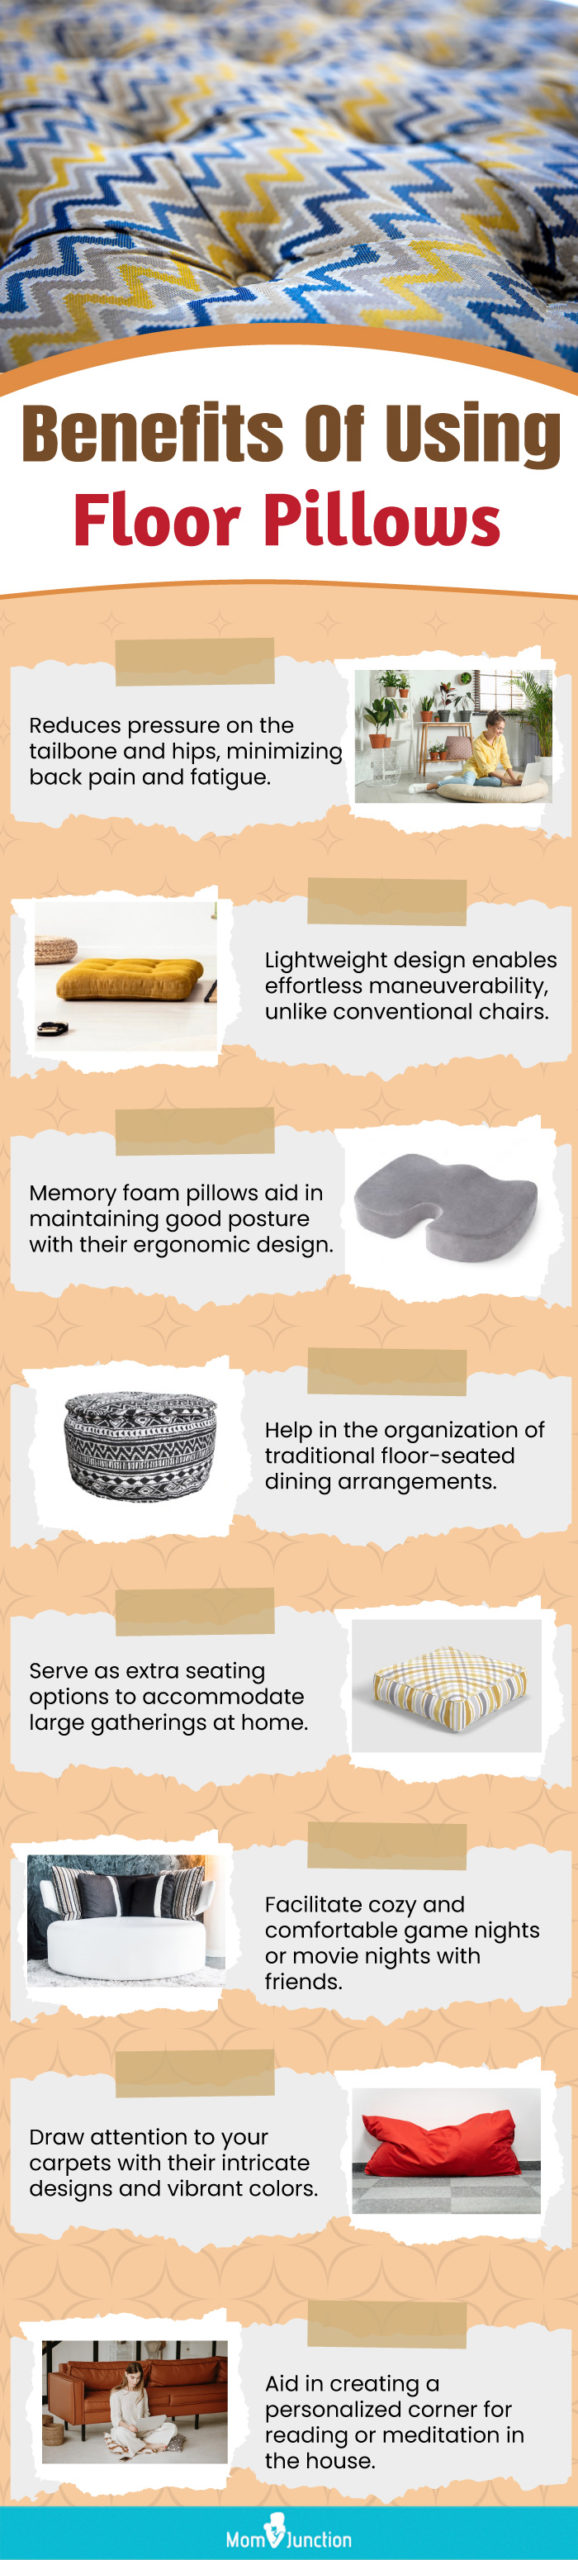 Benefits Of Using Floor Pillows (infographic)